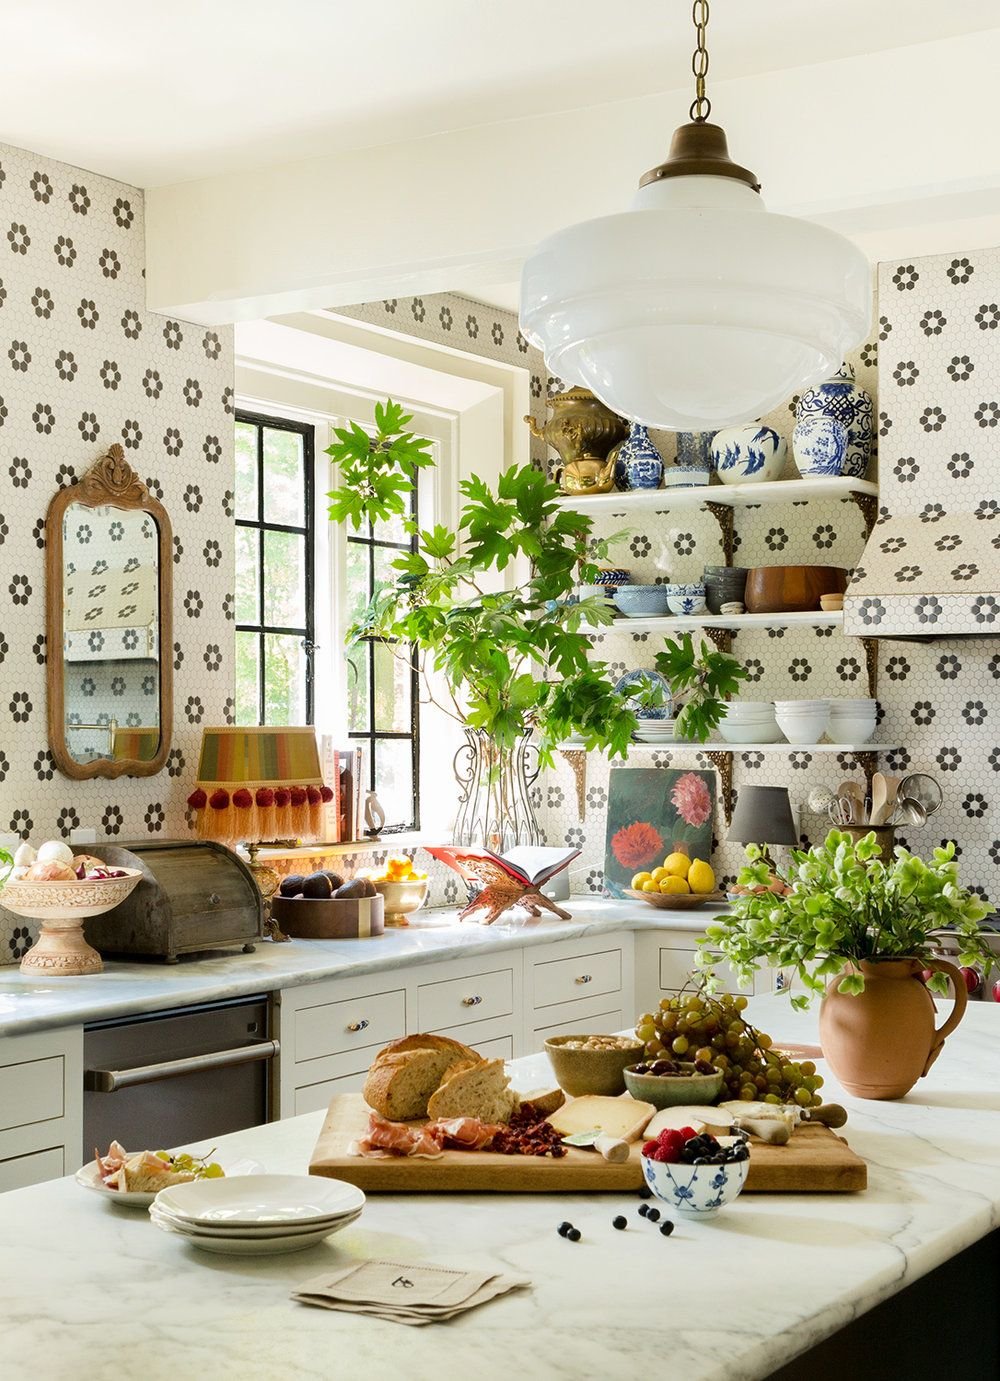 This is a kitchen space but I die for this tile, and the overall bright, fun feel.